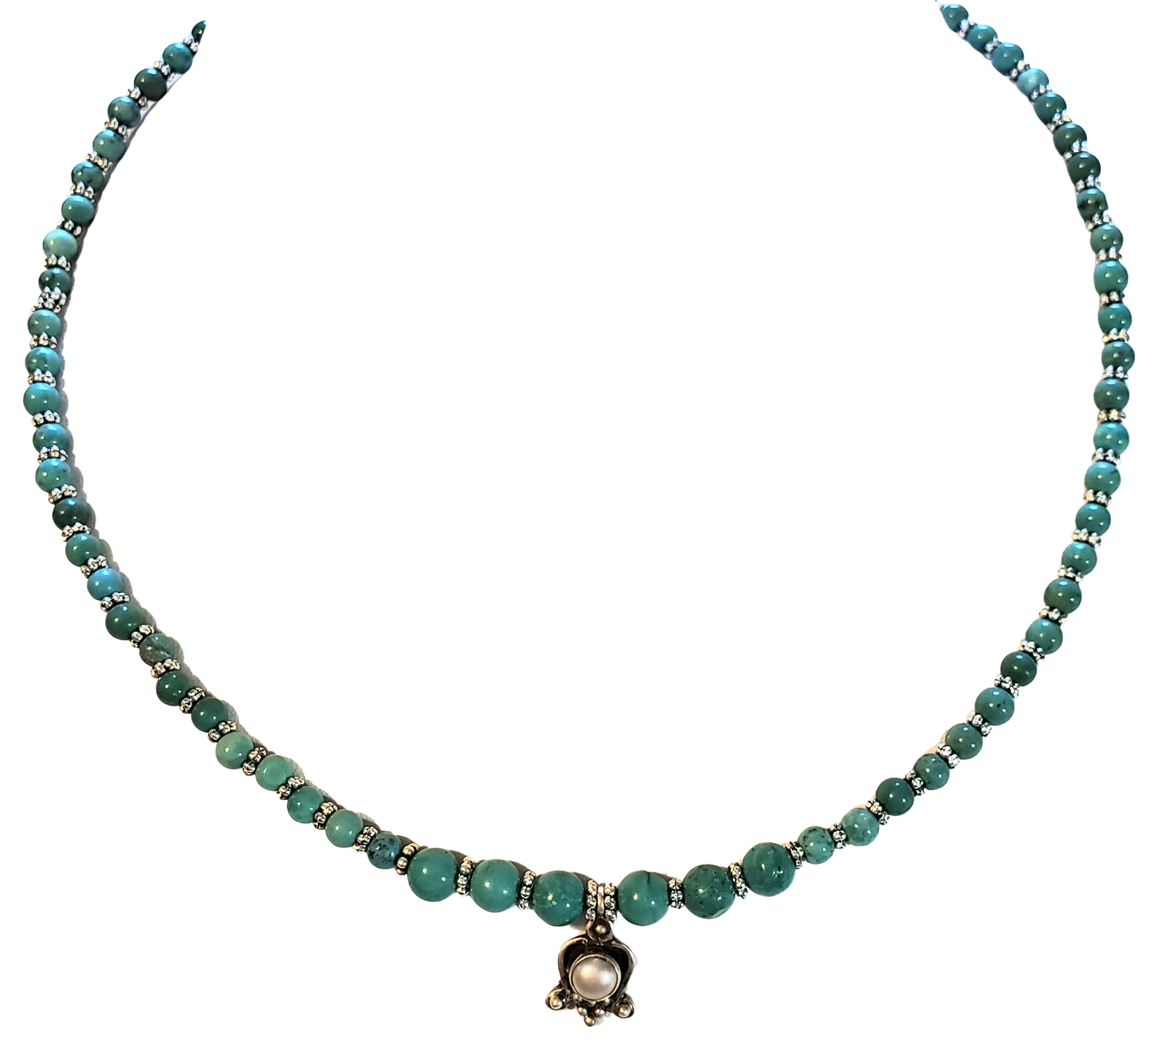 Faux Pearl Howlite Turquoise Necklace